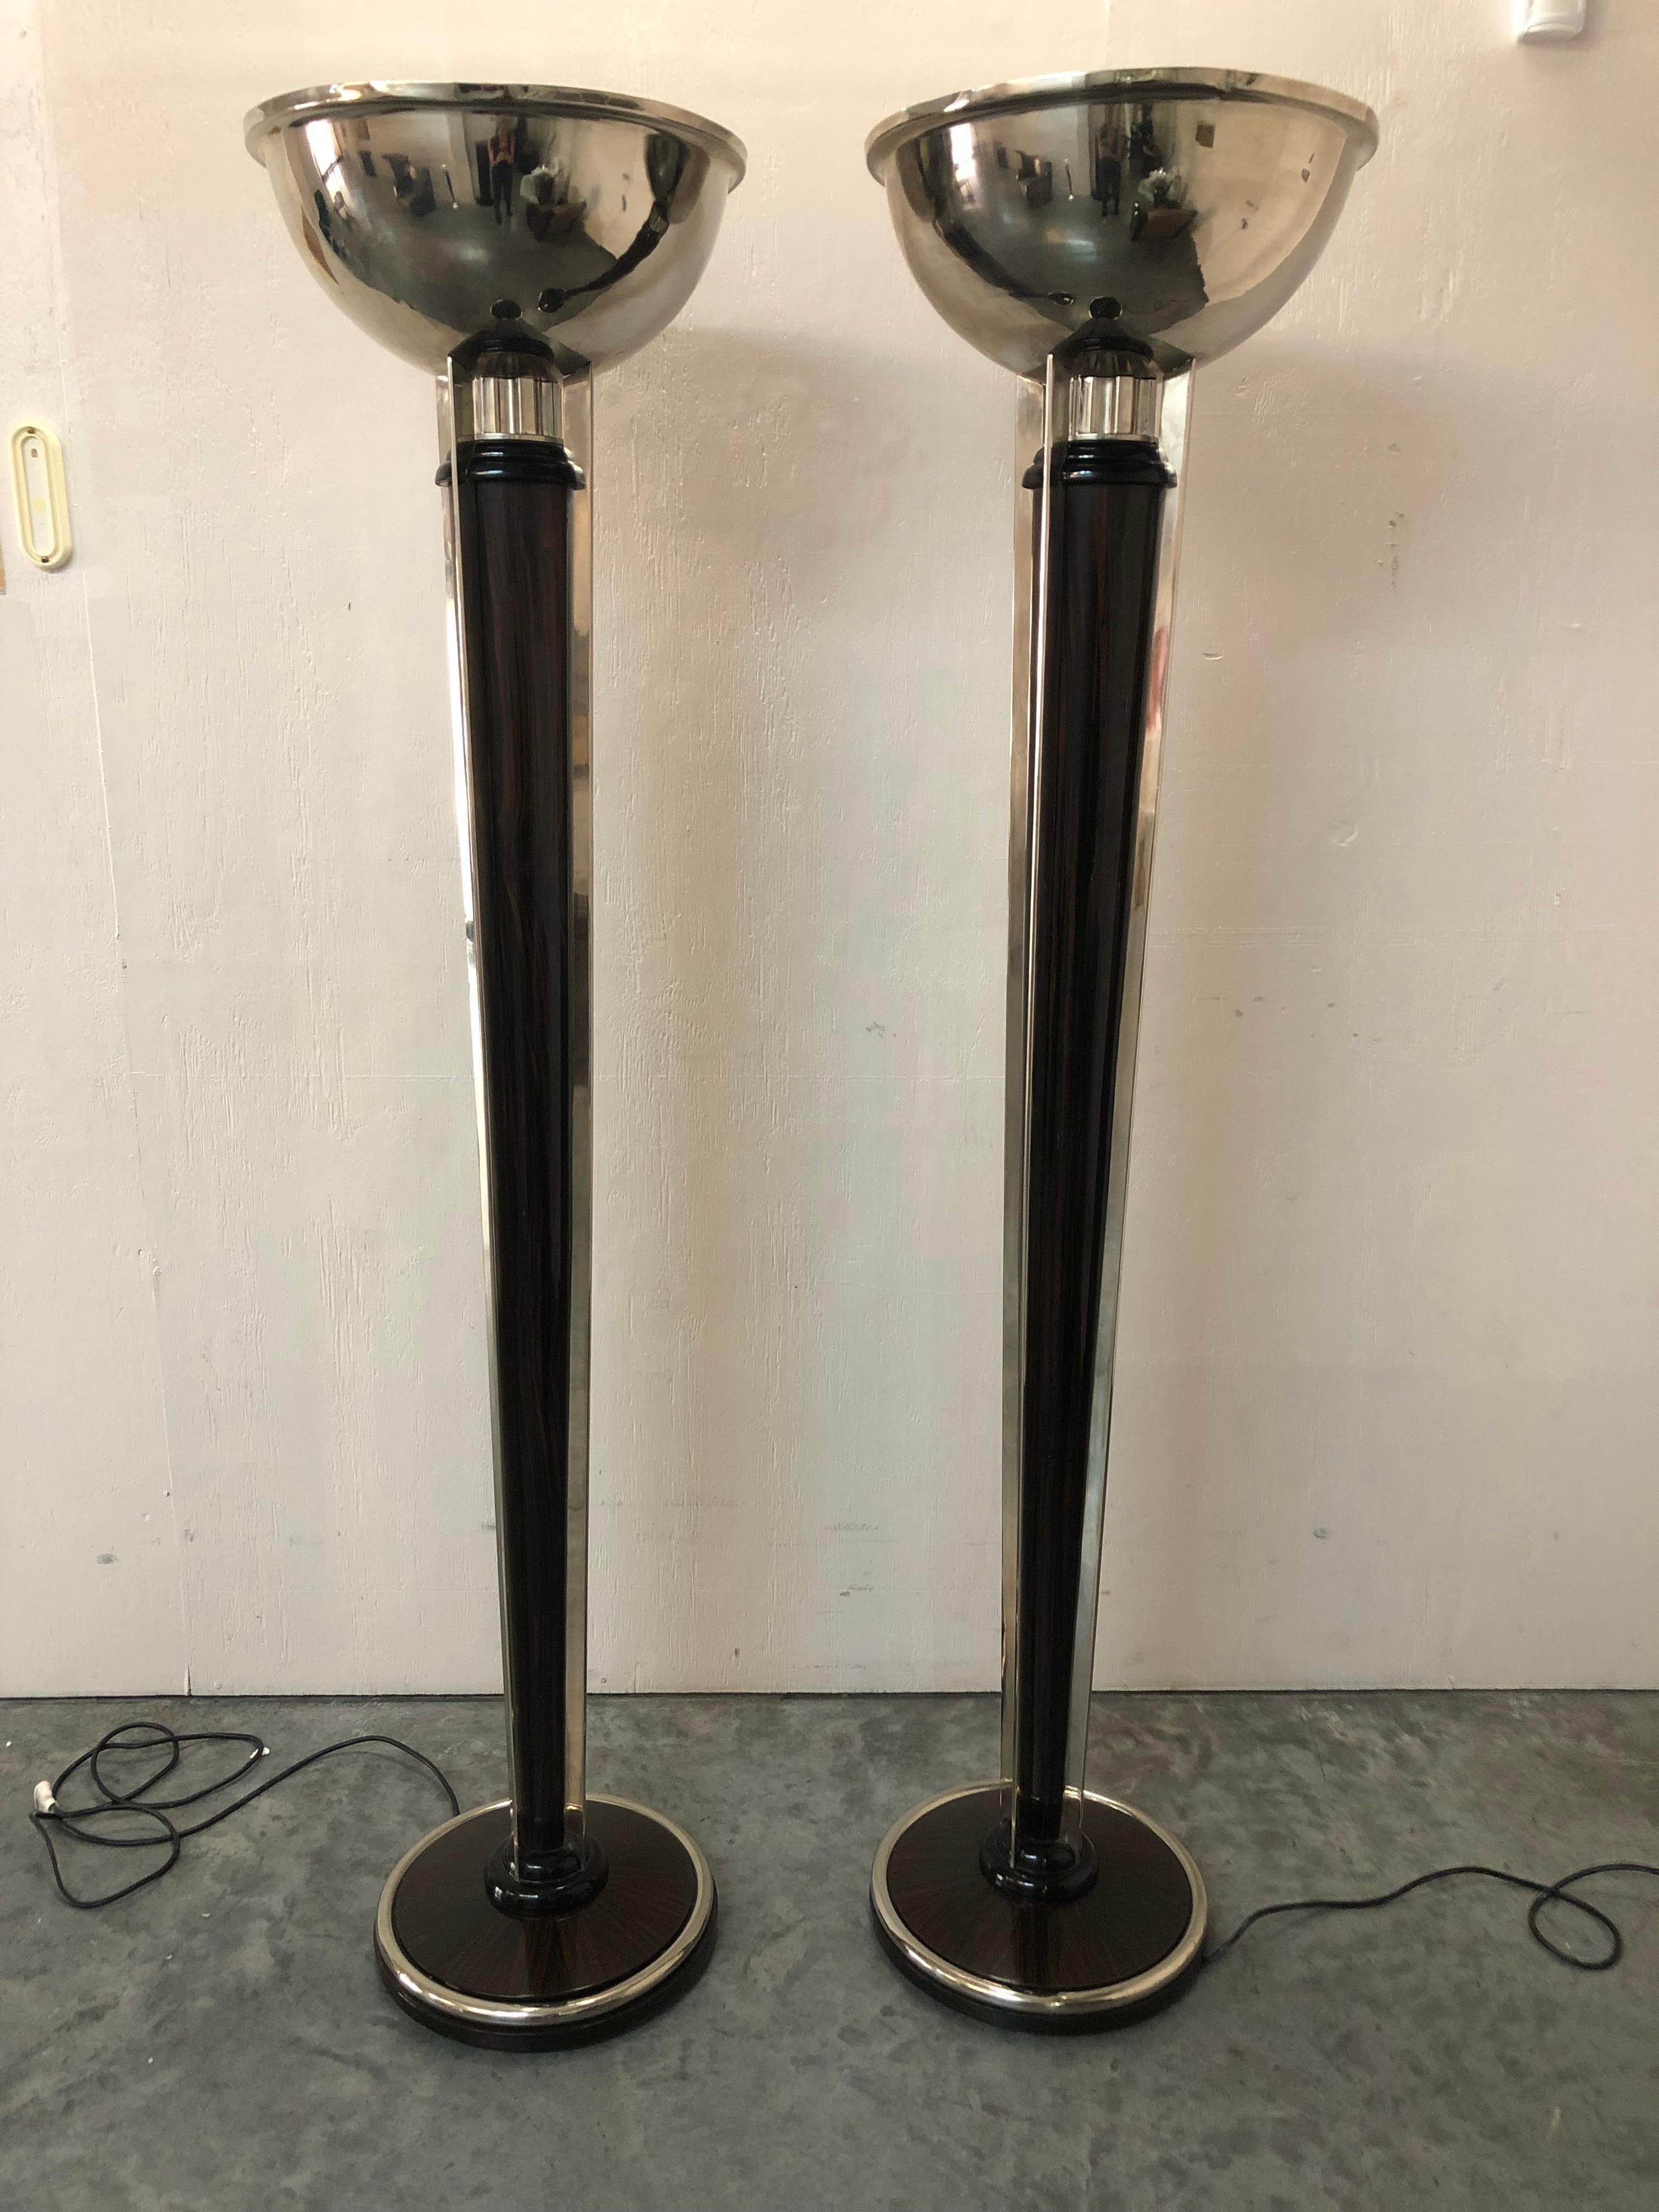 2 Art Deco Floor Lamps, France, Materials: Wood and Chrome, 1930 For Sale 2